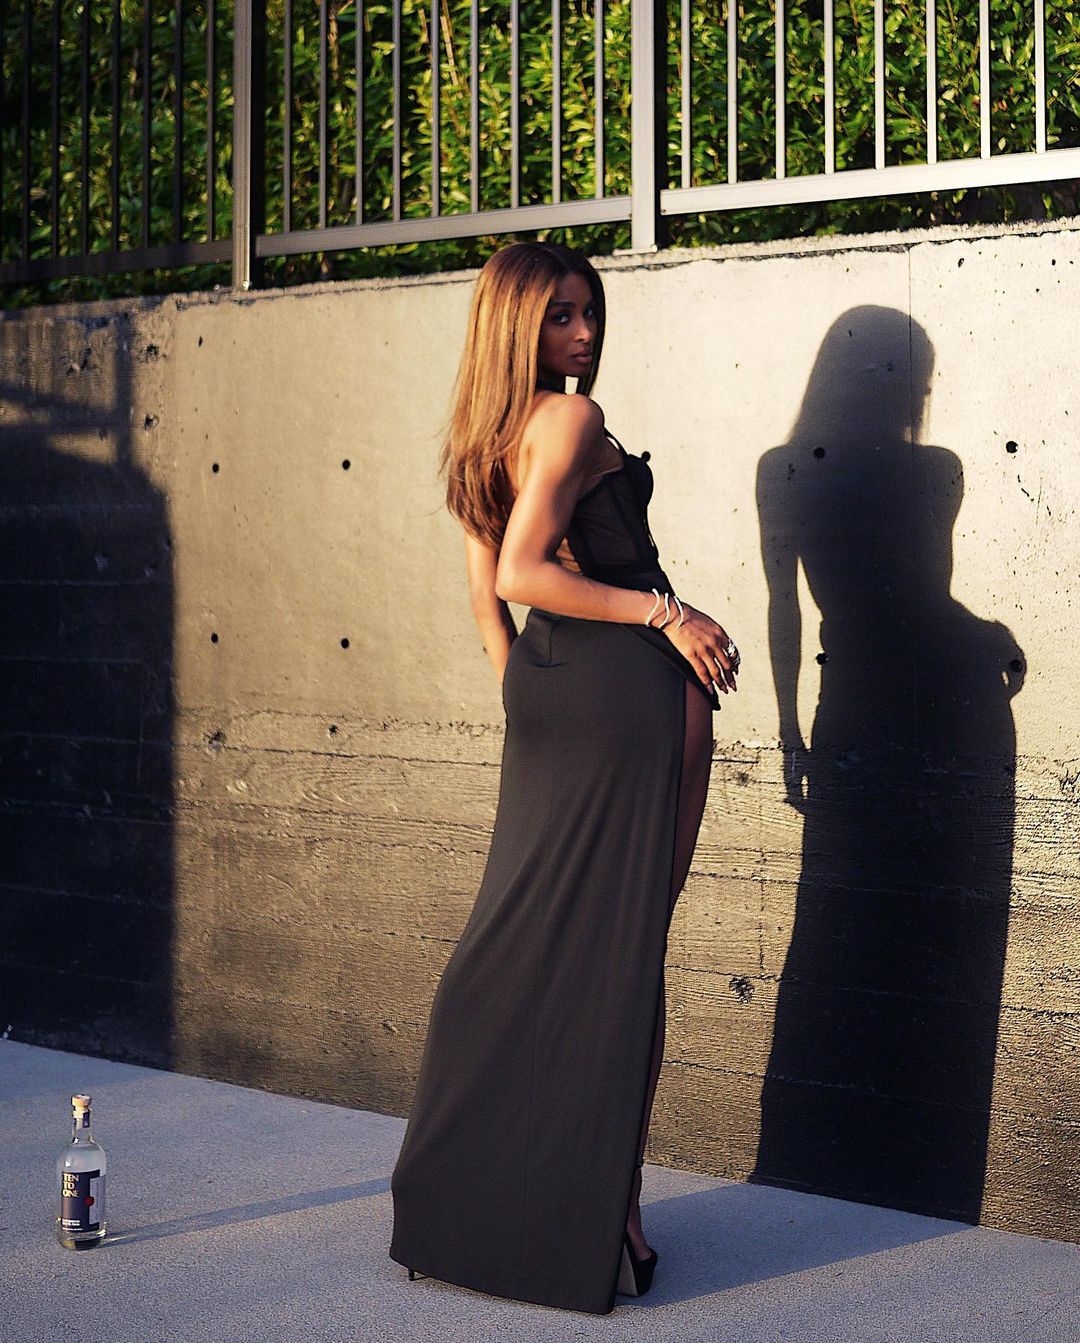 Ciara is Working Her High Slit! - Photo 4